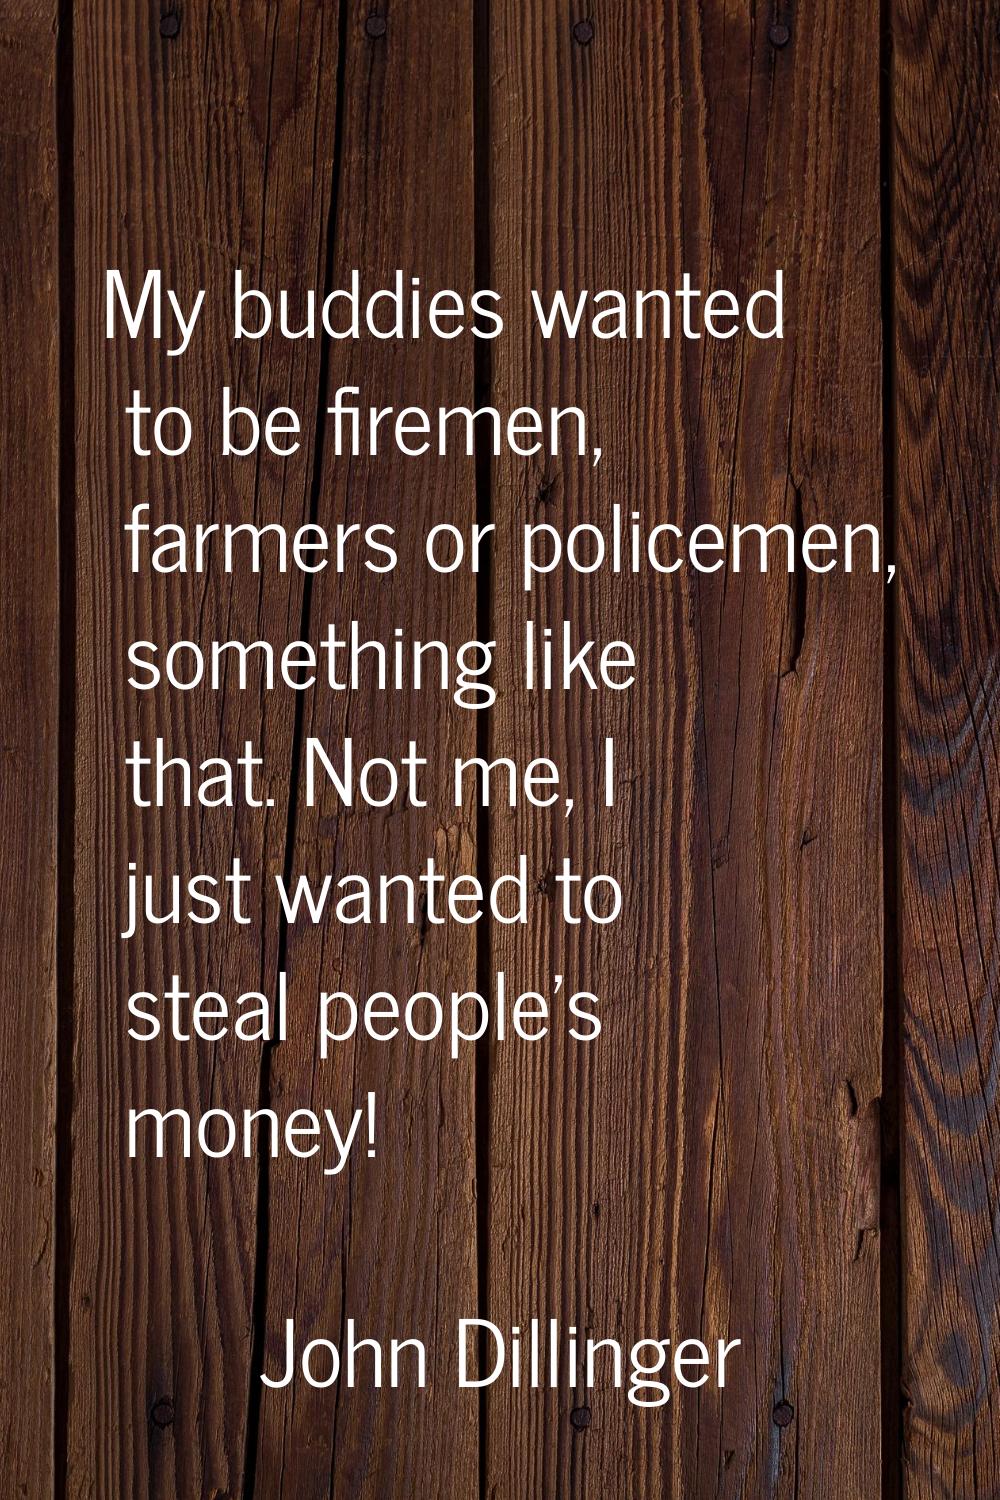 My buddies wanted to be firemen, farmers or policemen, something like that. Not me, I just wanted t